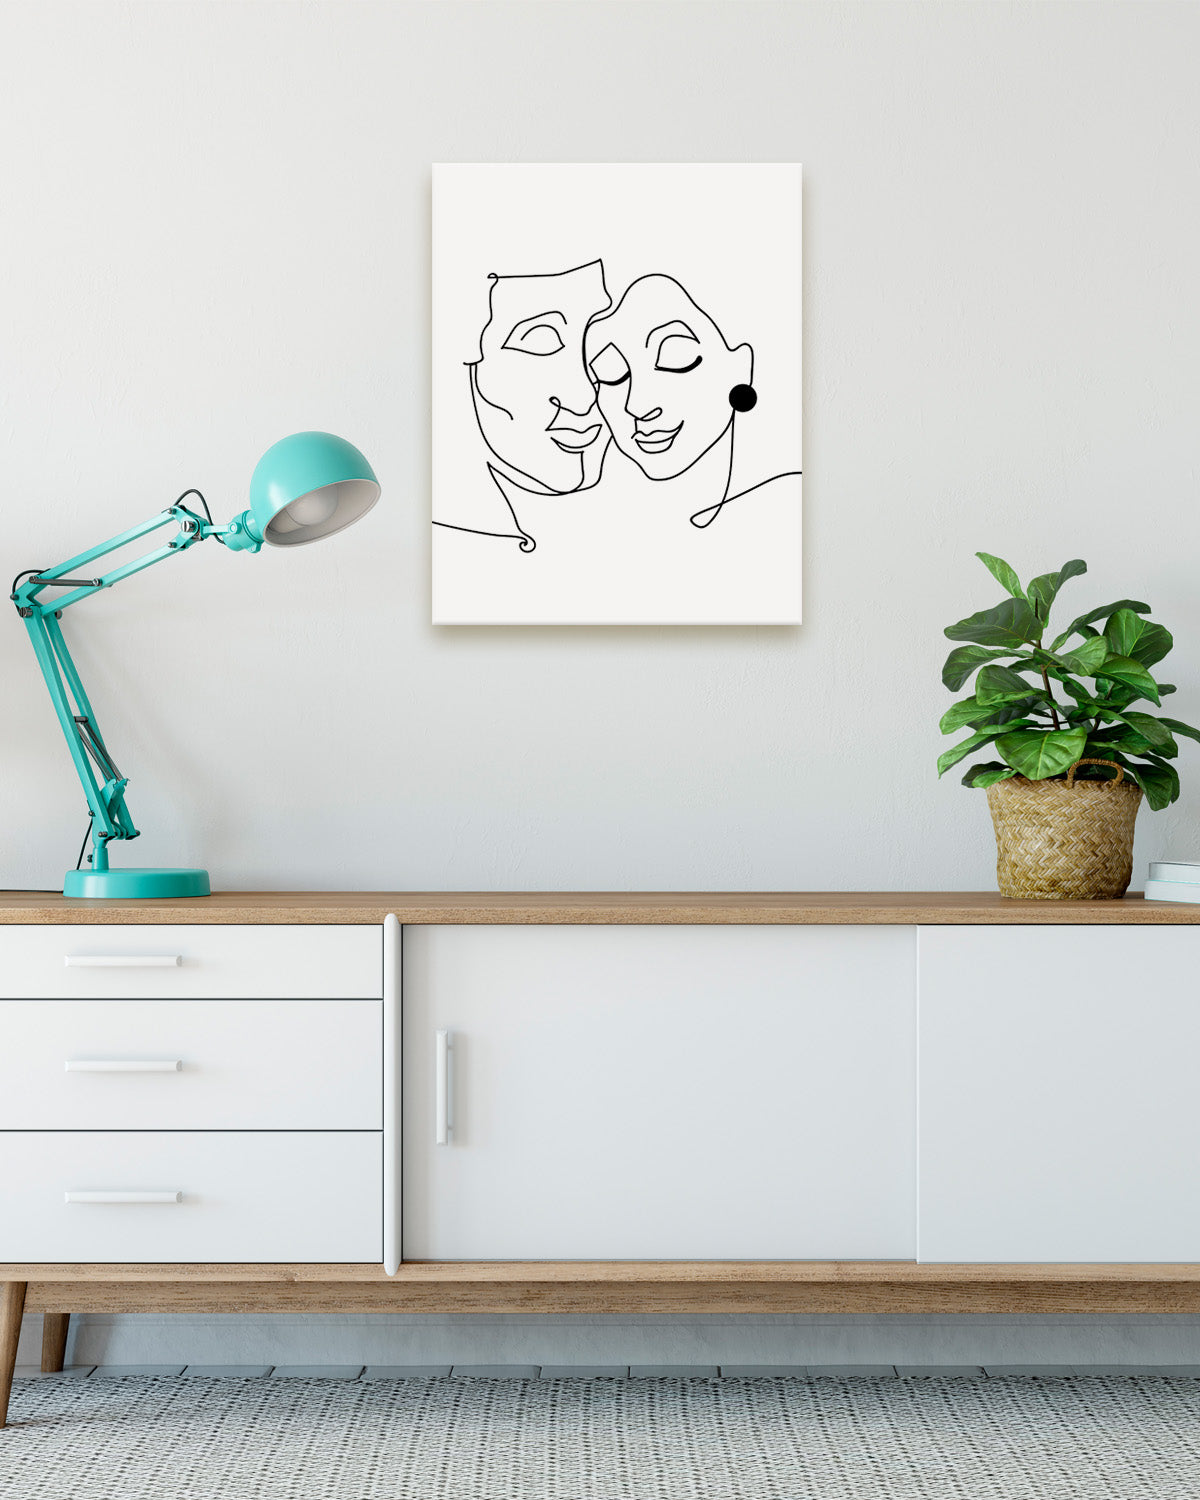 Abstract Line Drawing of A Man and A Woman - Wall Decor Art Print with a white background